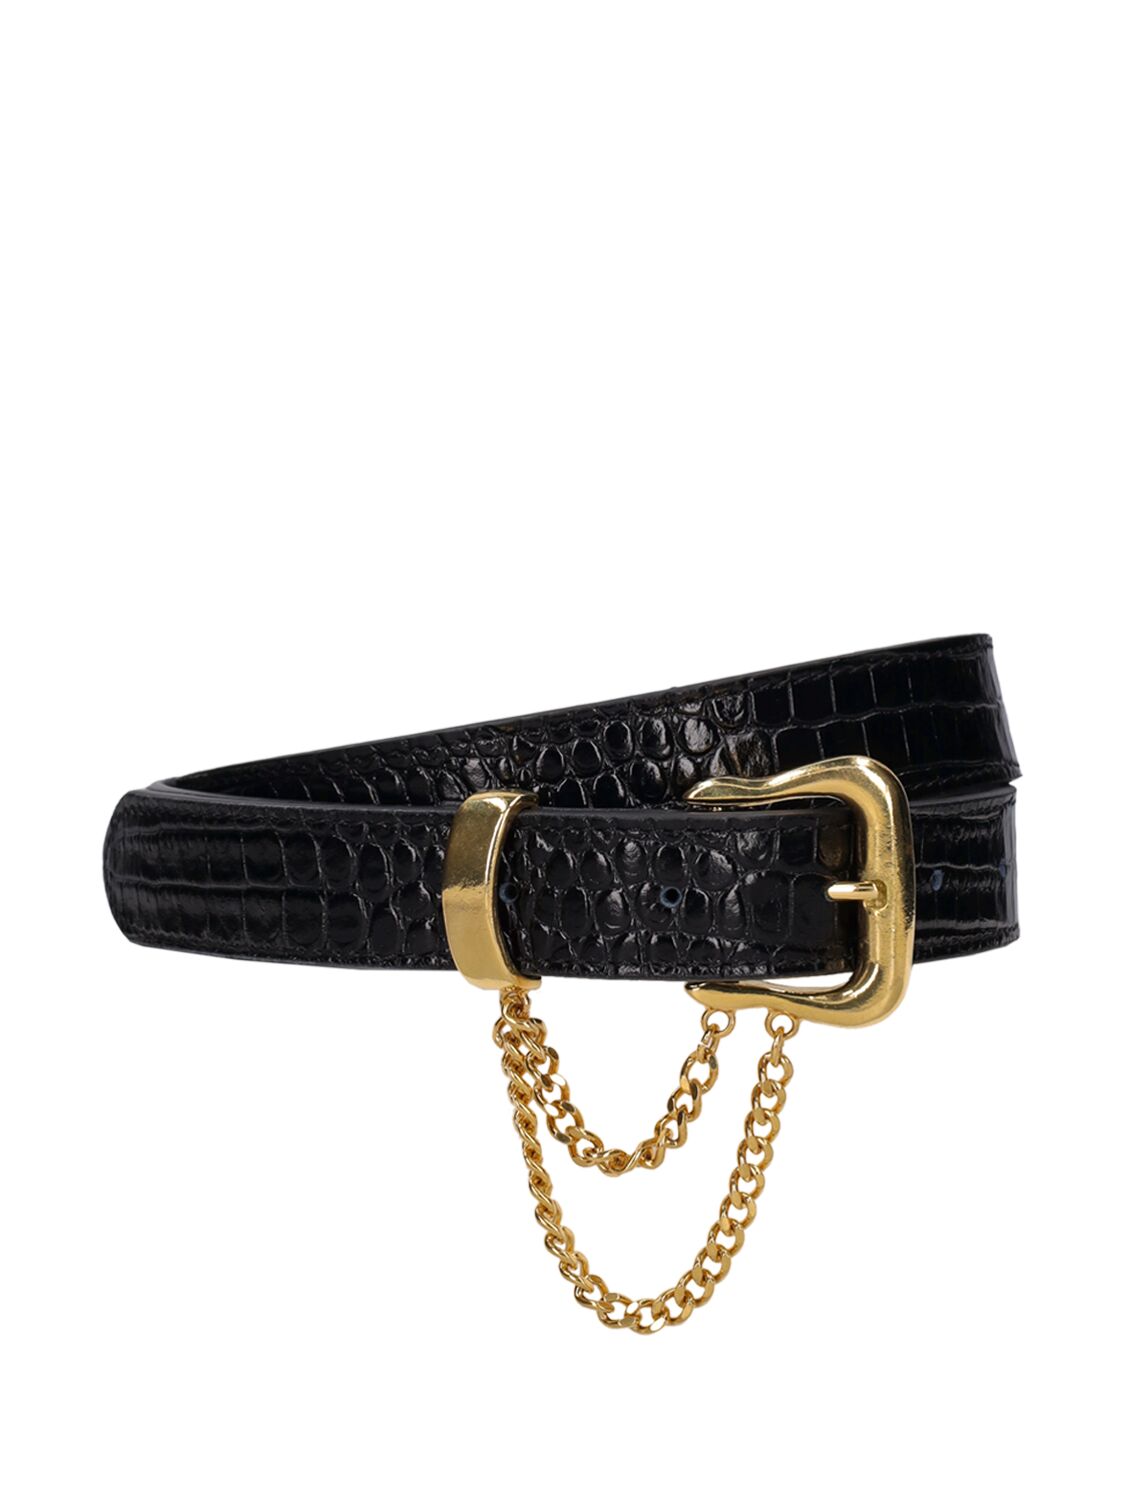 Embossed Leather Belt W/ Chain